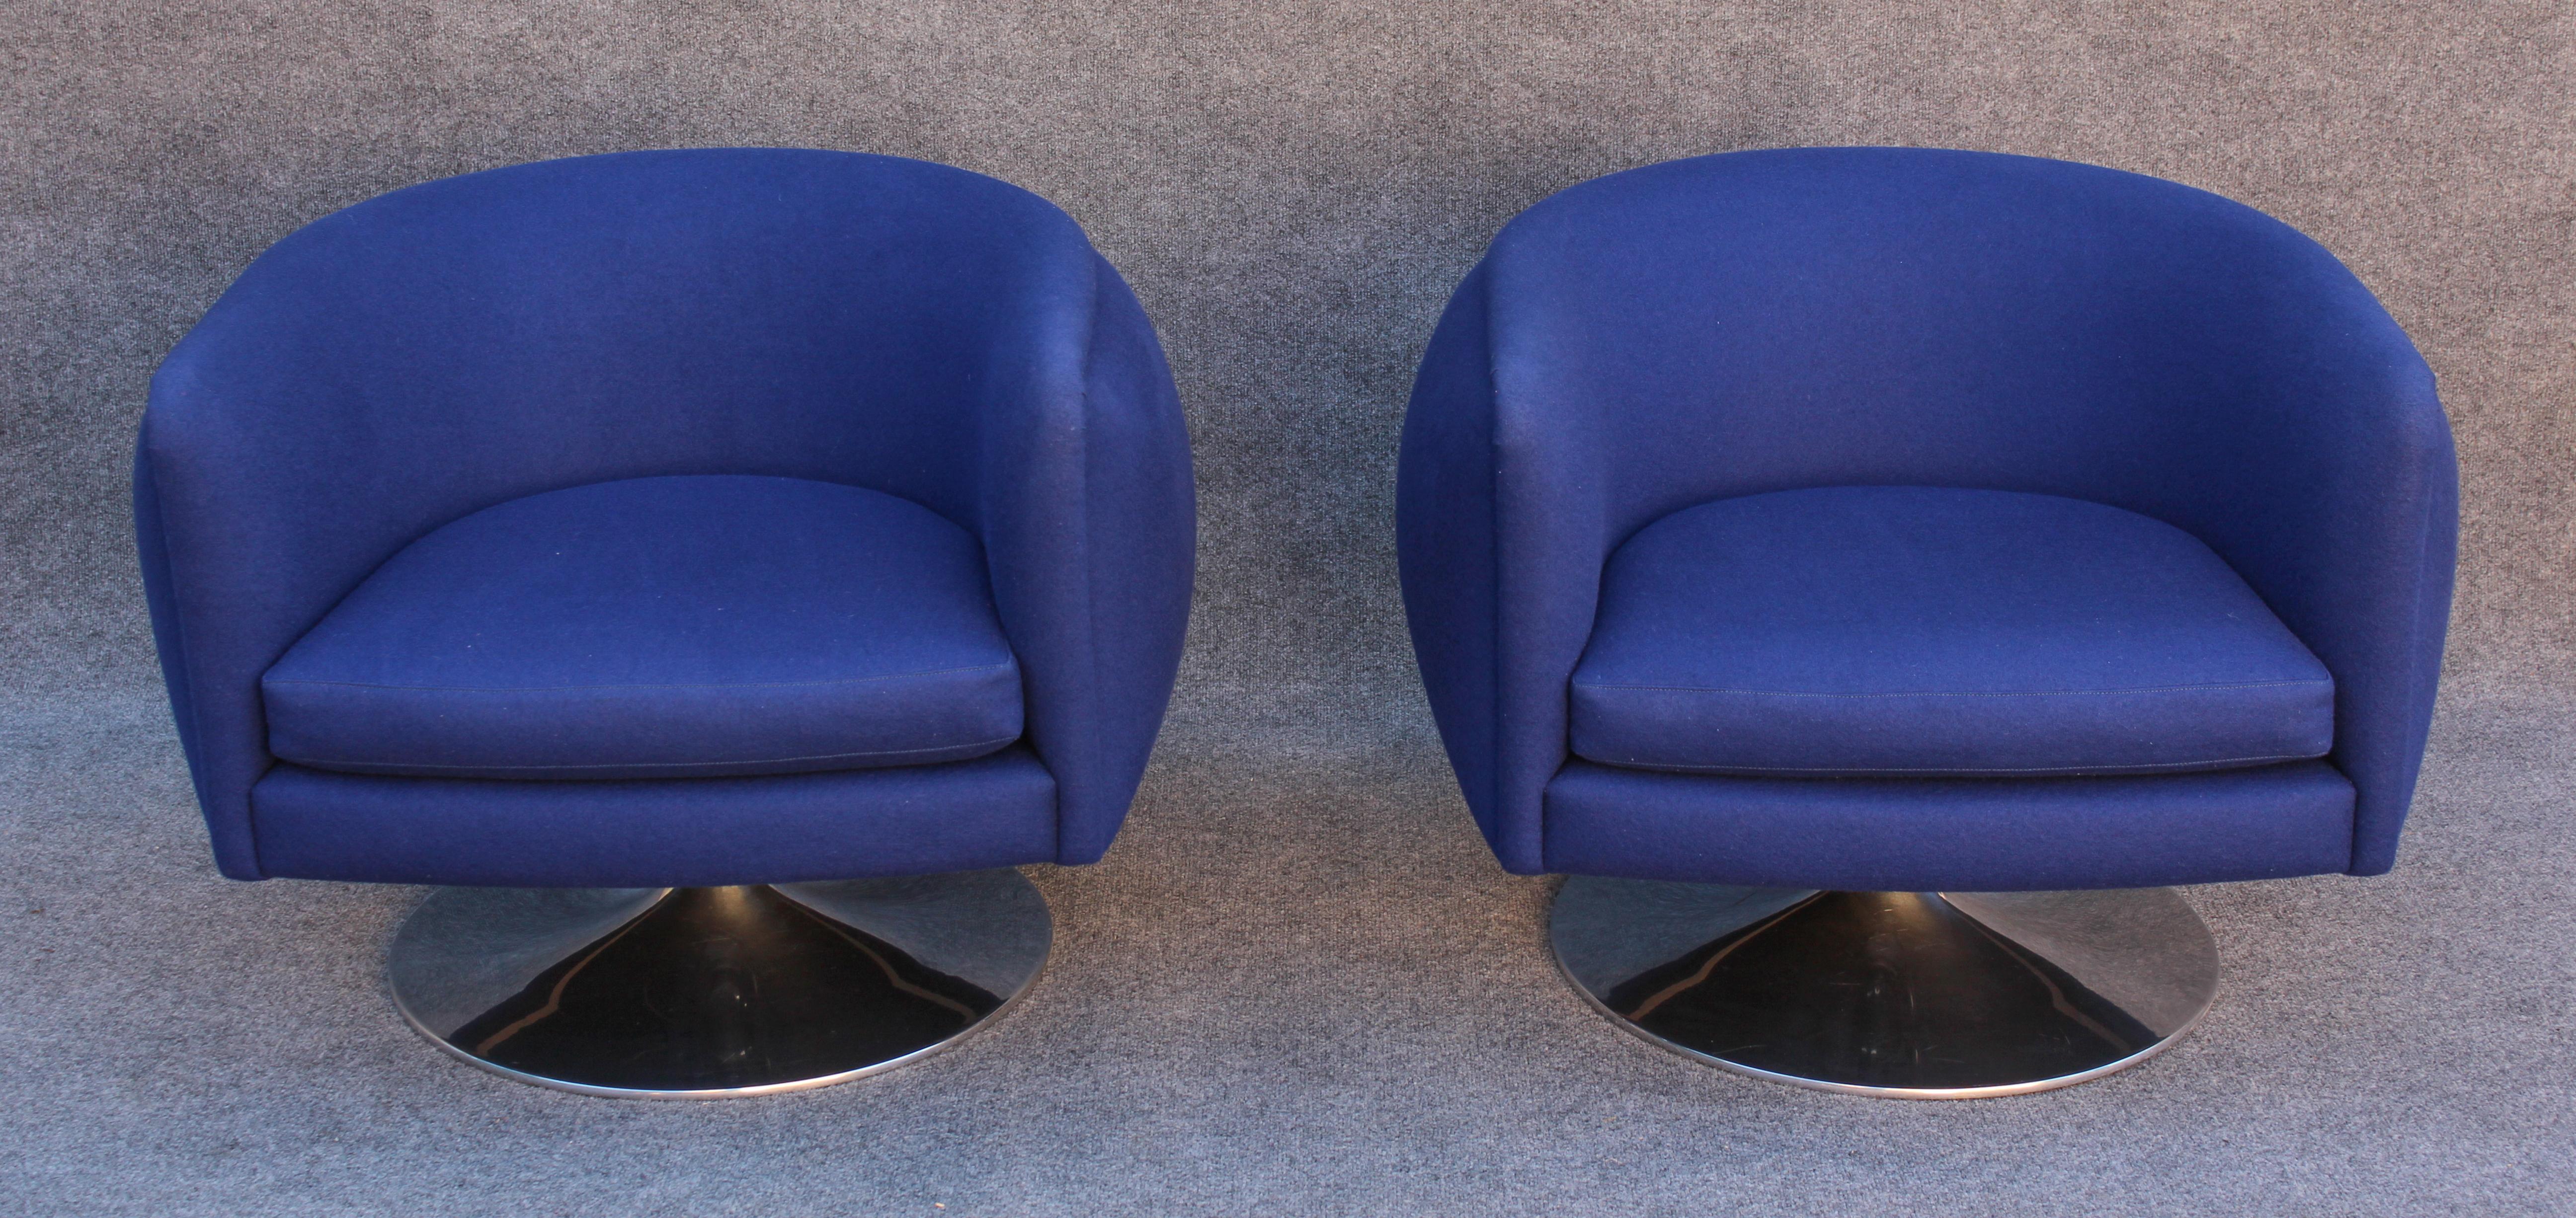 One of Joe D'Urso's most iconic designs, this pair of chairs was produced in  by Knoll. This pair forgoes the 'return to center' feature in favor of the more practical height adjustment, which is operated with a lever beneath the seat. This also